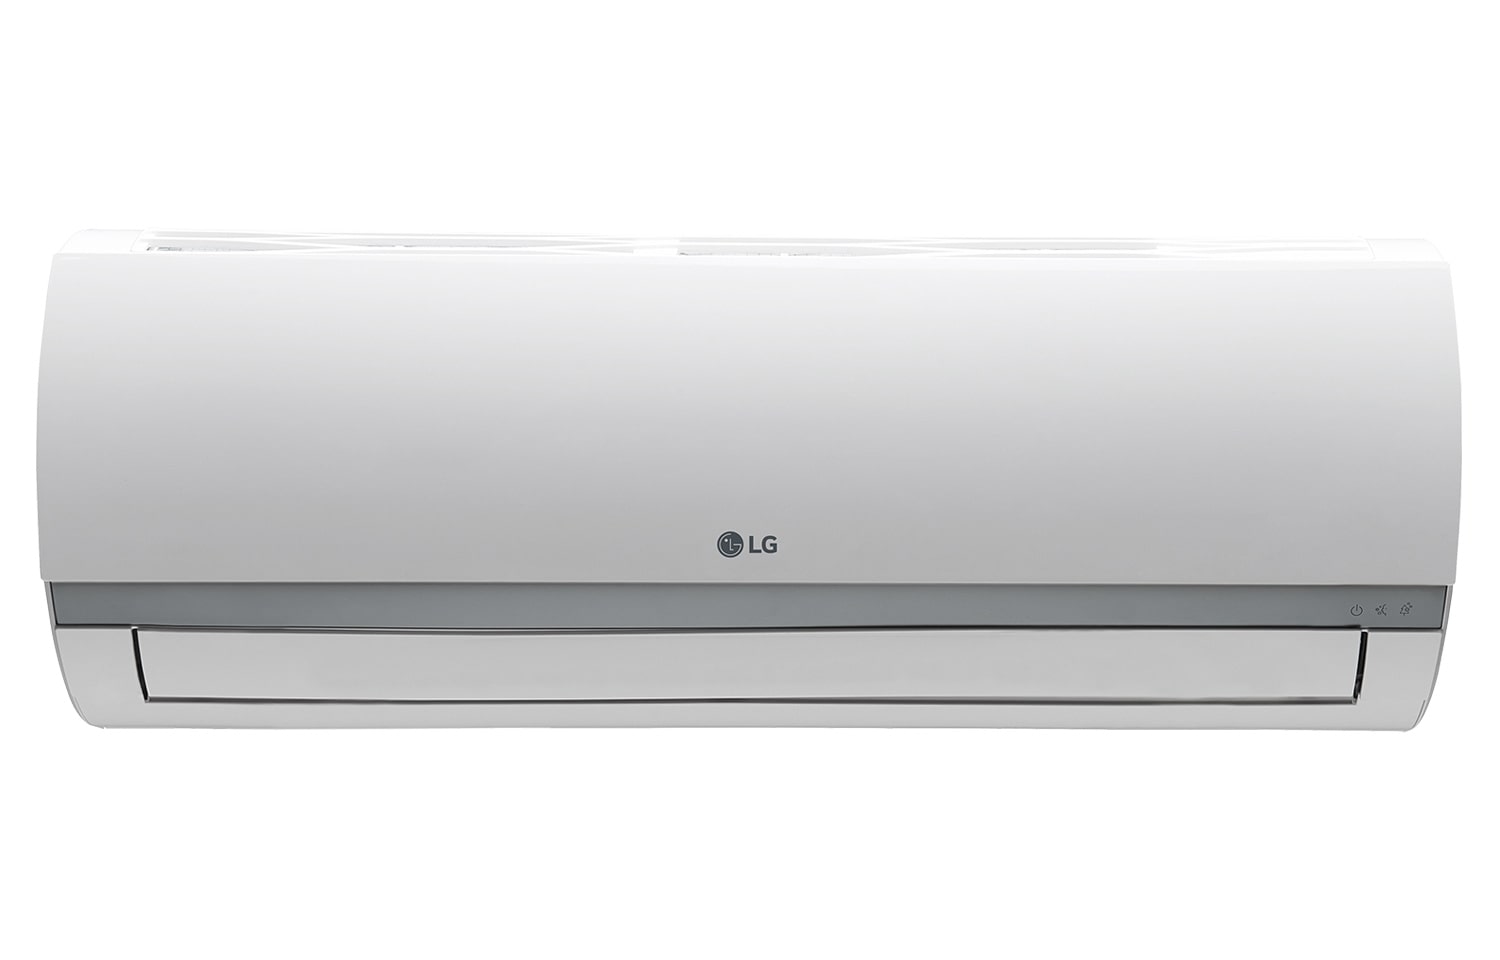 LG Deluxe Non-Inverter Air Conditioner – 1.5HP, BS-C126HYA0